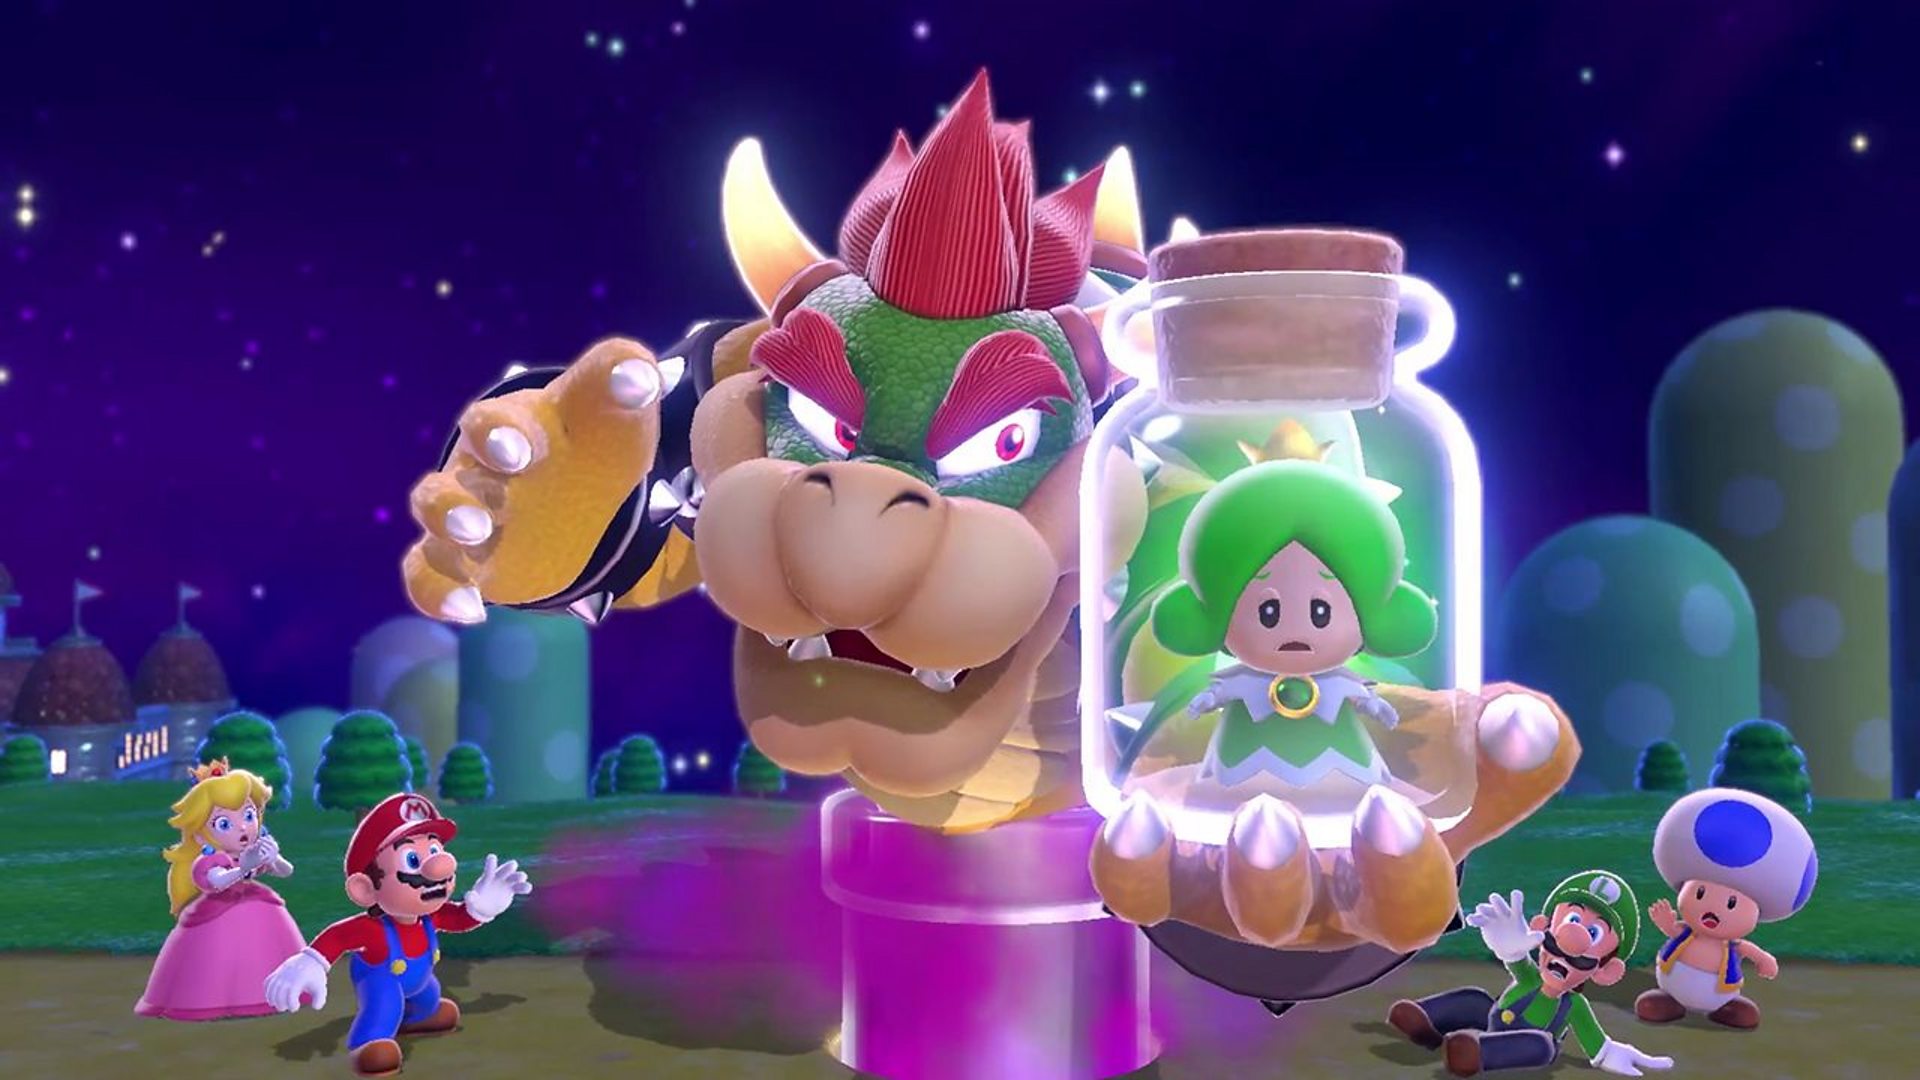 c The Social Super Mario 3d World Bowser S Fury Review Chaotic Fun With A Smooth Multiplayer And The Biggest Bowser